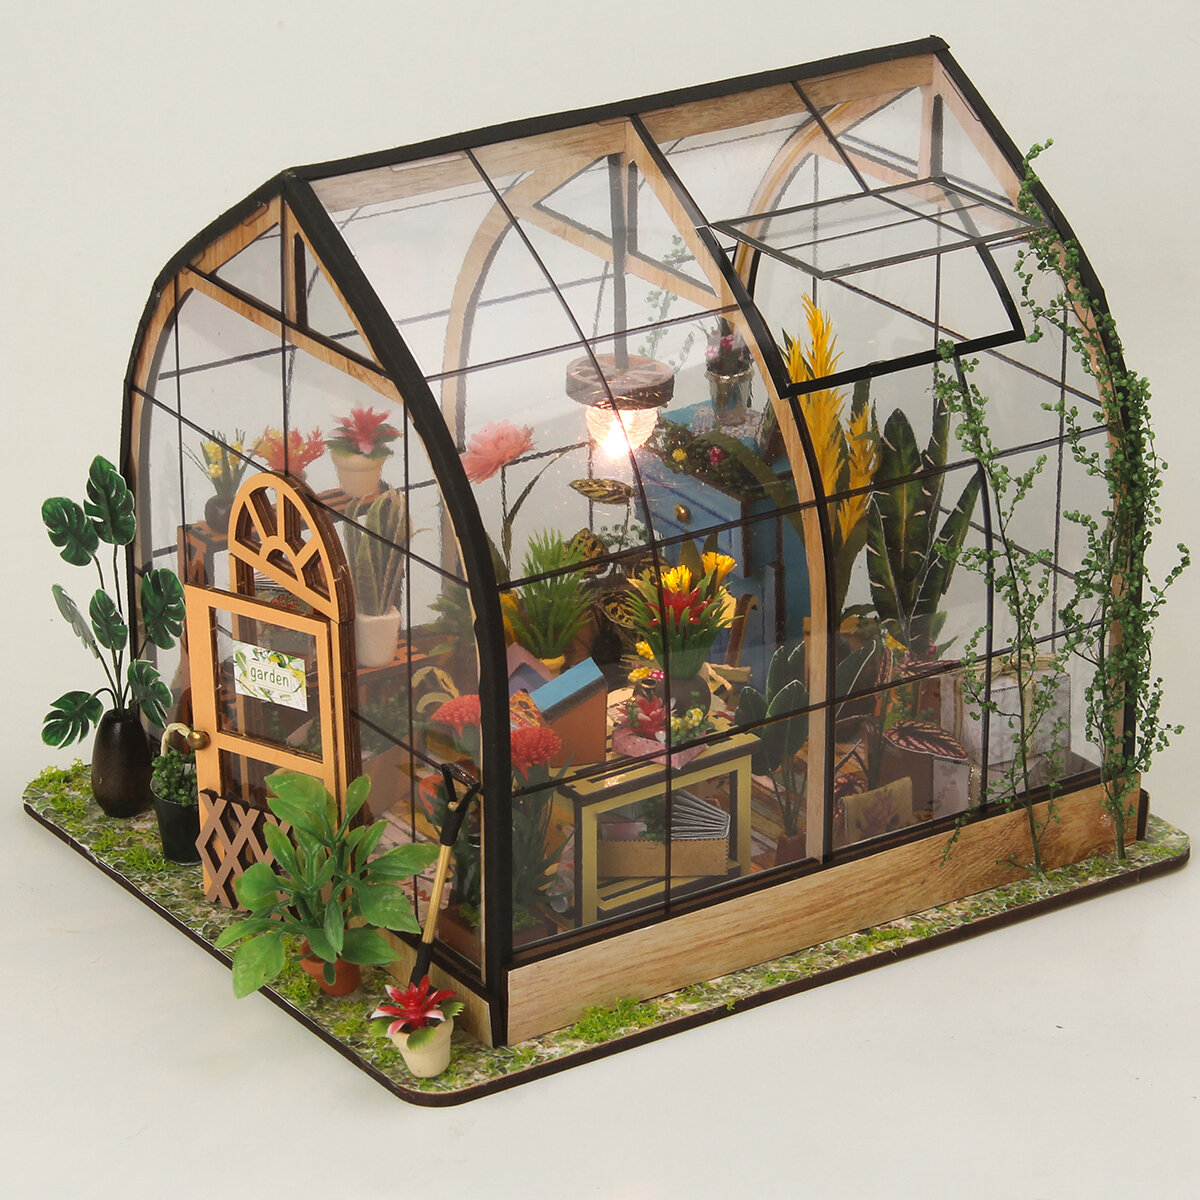 

DIY Garden Dollhouse Kit Miniature Greenhouse Building Model Room Box Wooden Dollhouse for Adult Kids Toys Birthday Gift